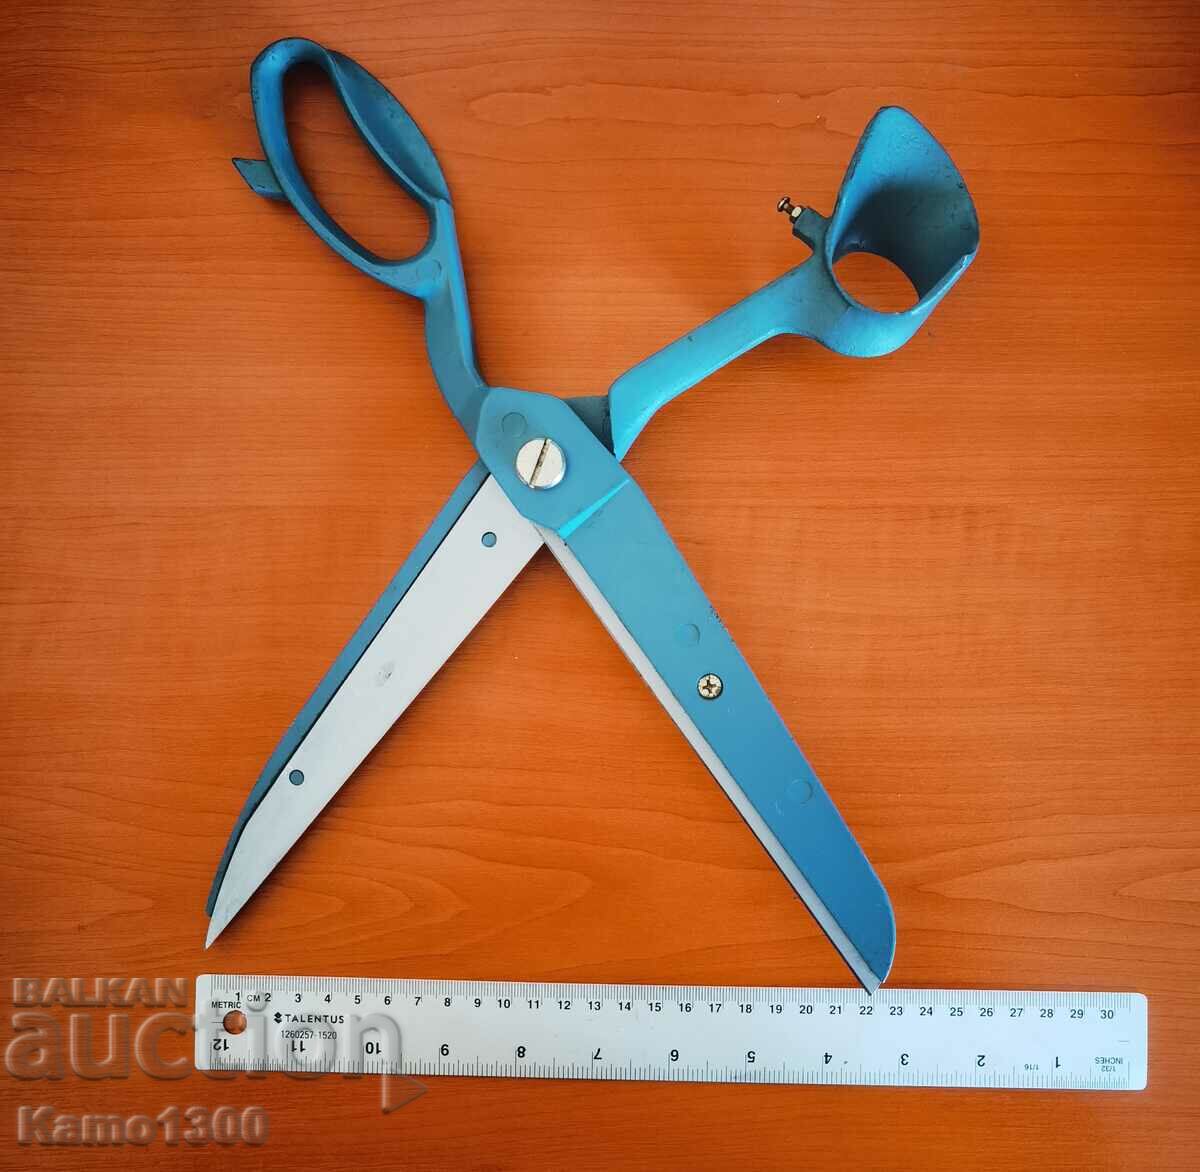 Sewing scissors for cutting